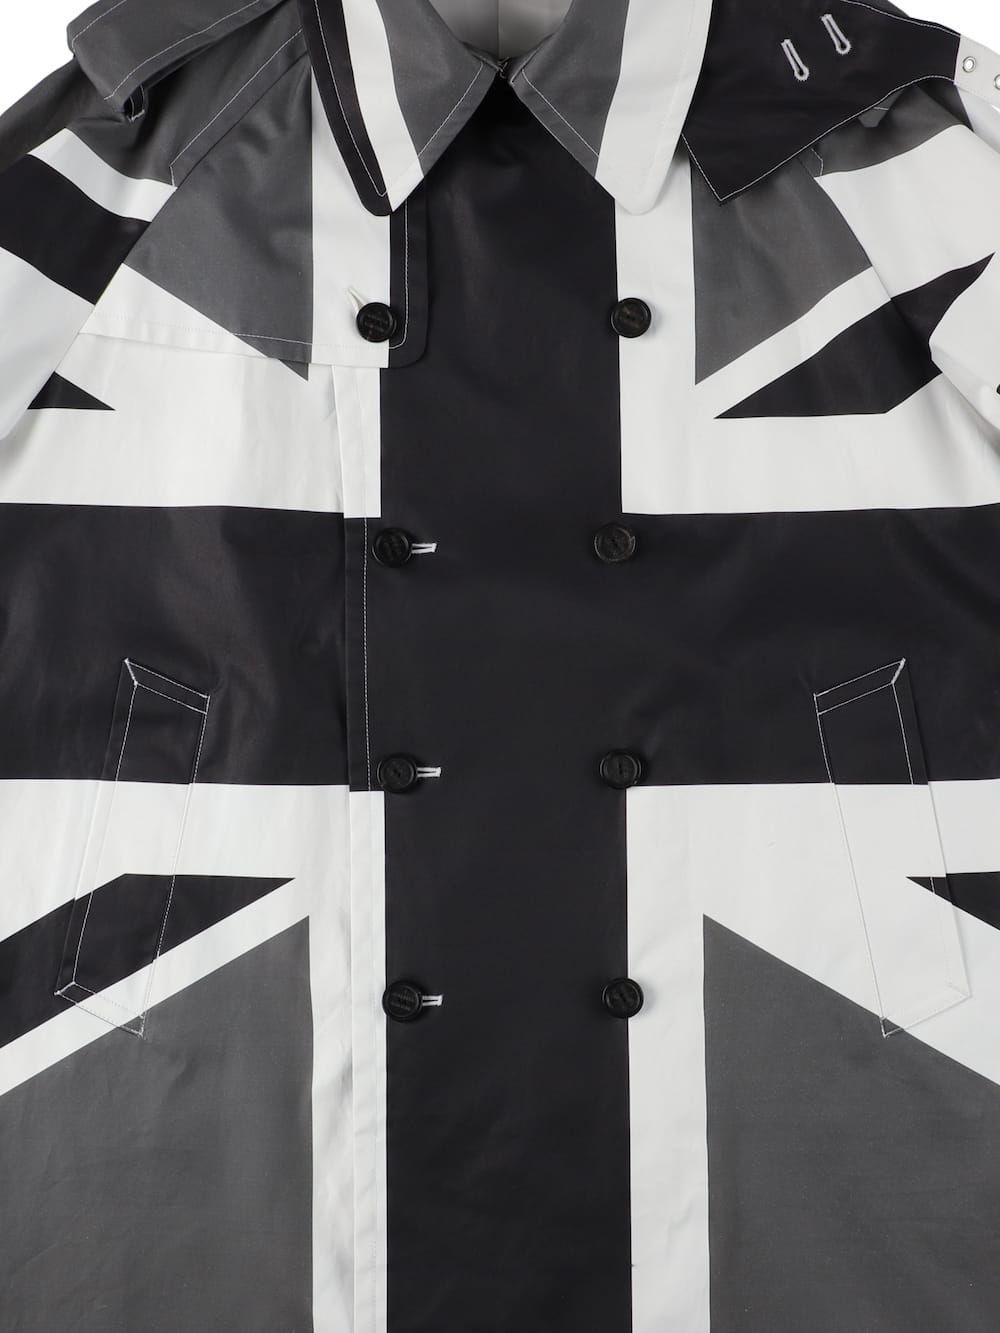 back gusset sleeve double breasted trench coat.(union jack)